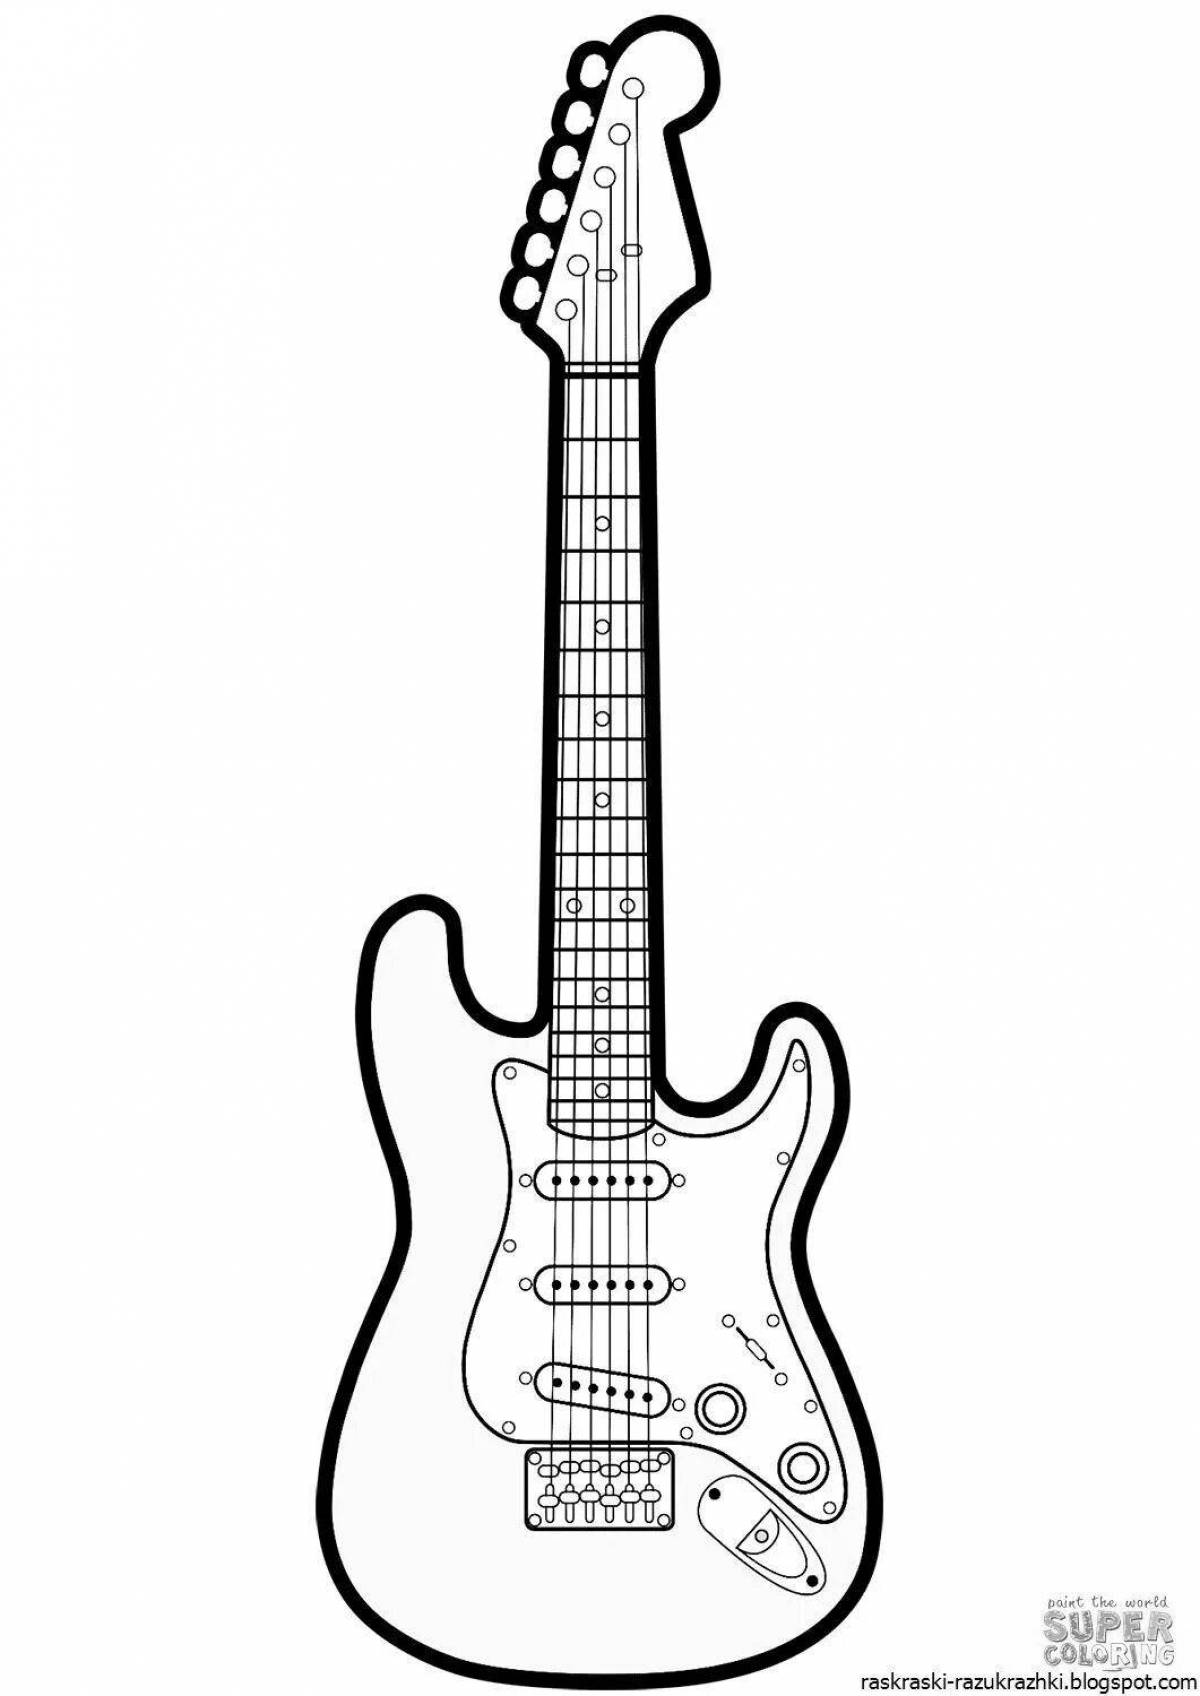 Charming electric guitar coloring book